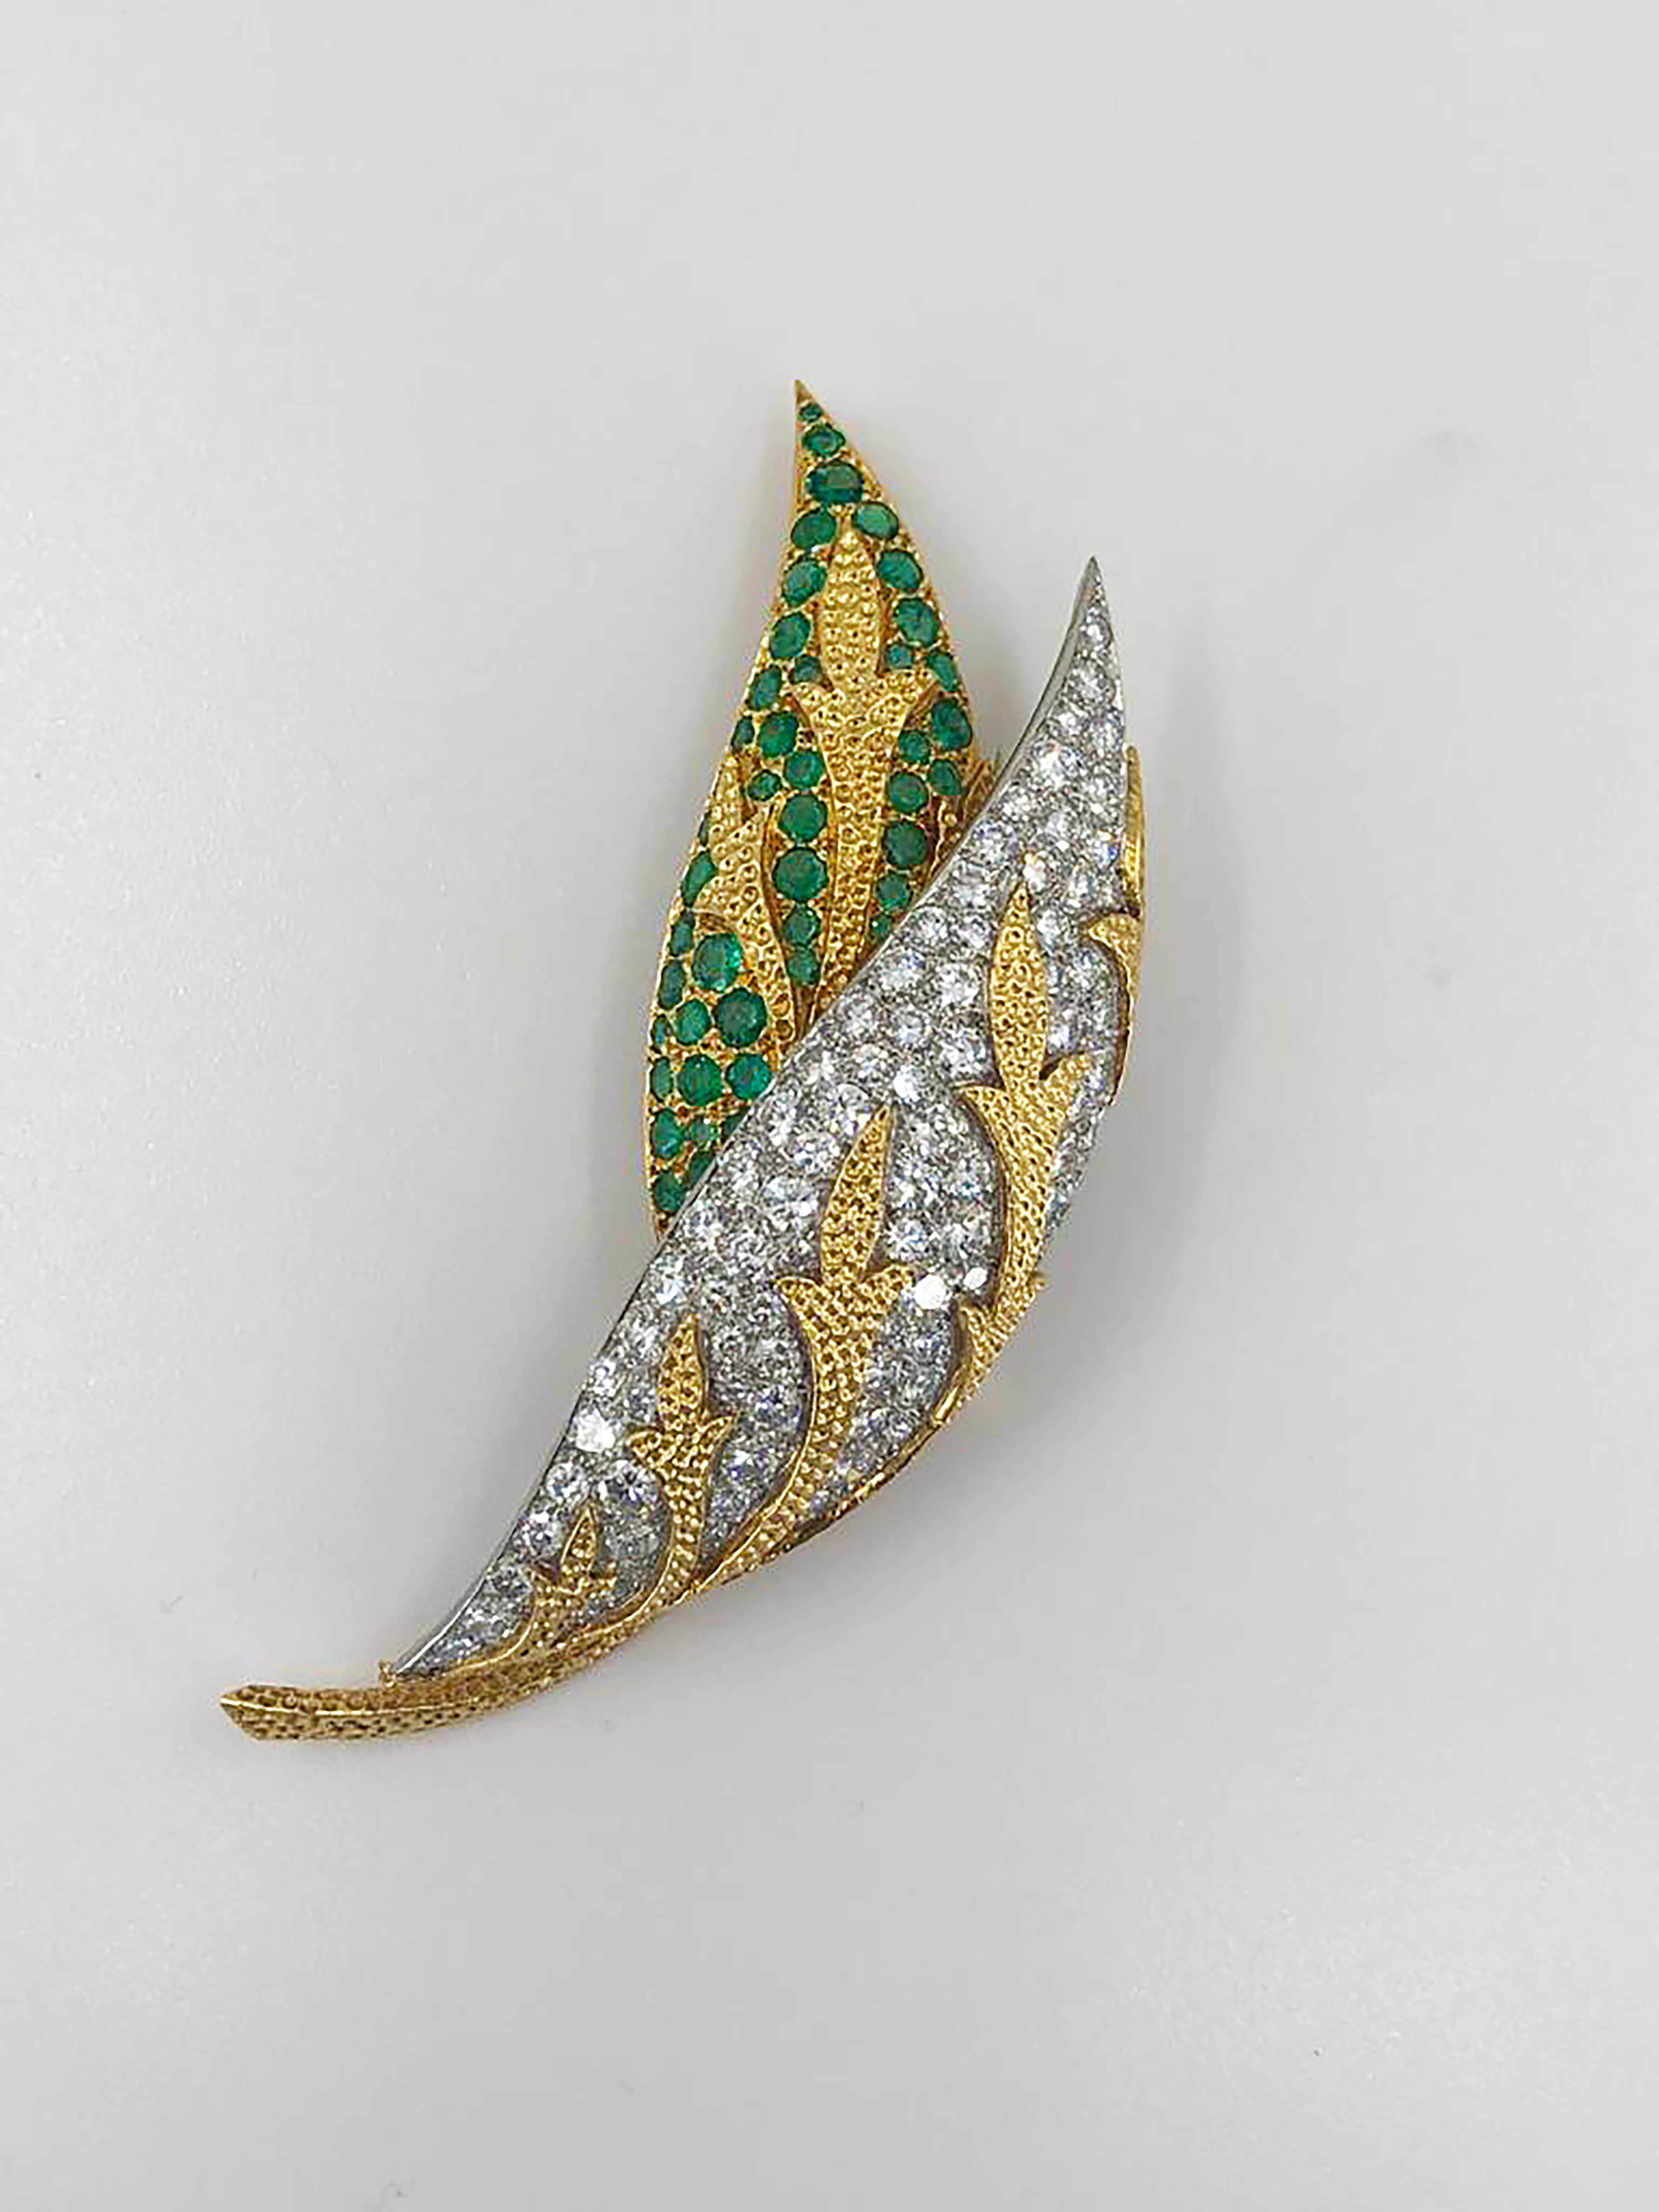 Fred Paris 18k two tone diamond and emerald lead brooch.

Approx. 3